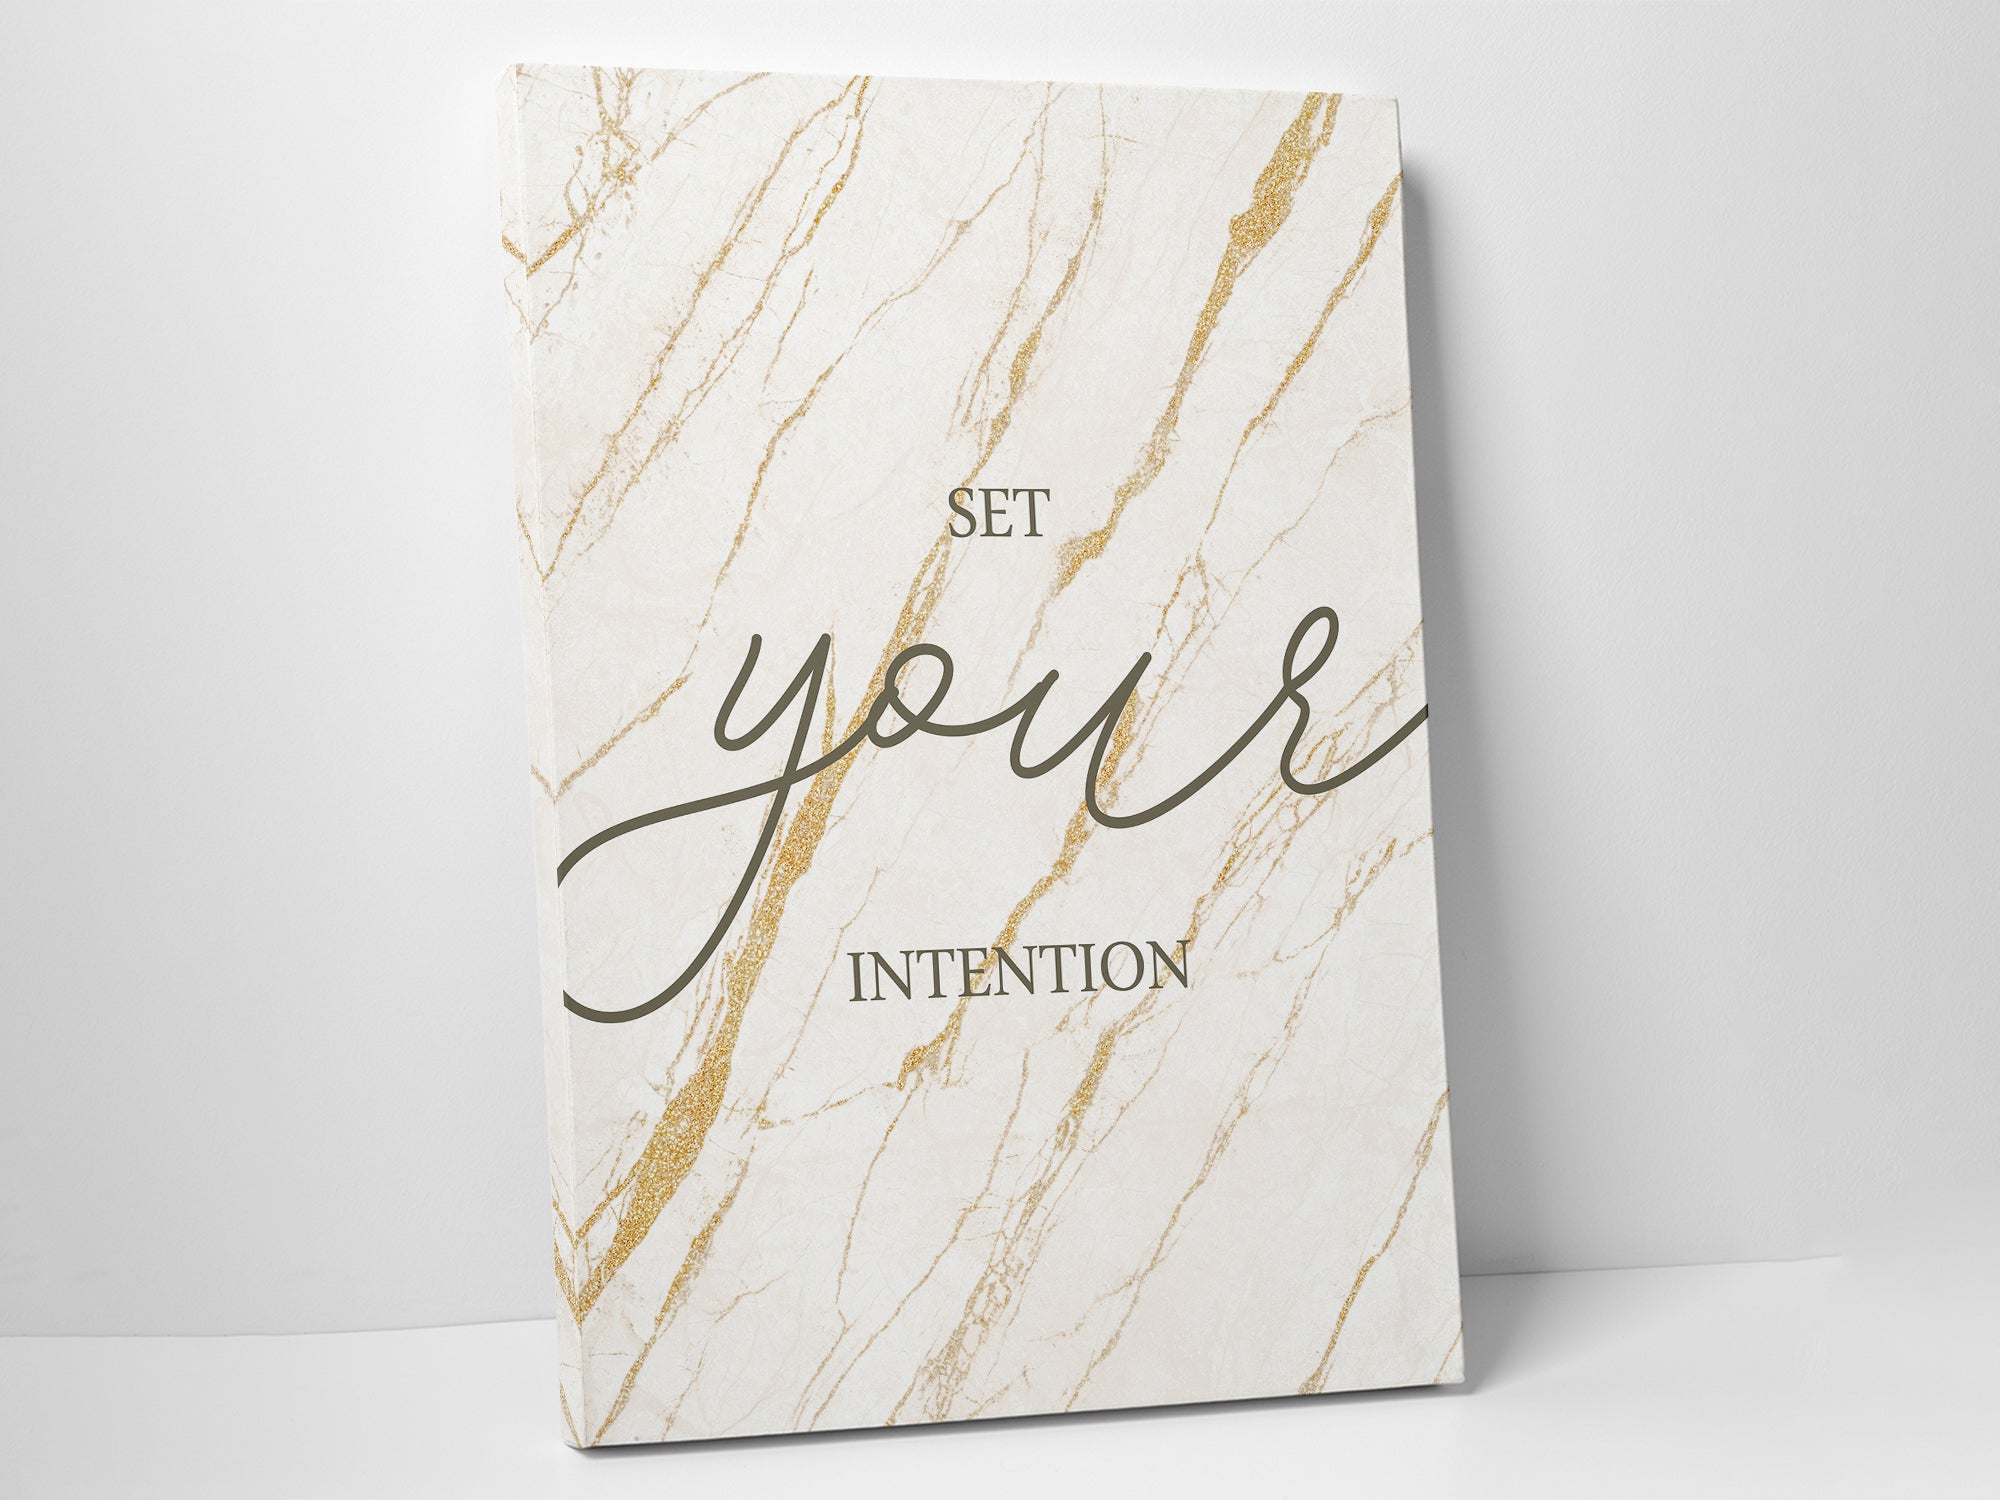 Set Your Intention - Canvas Wall Art